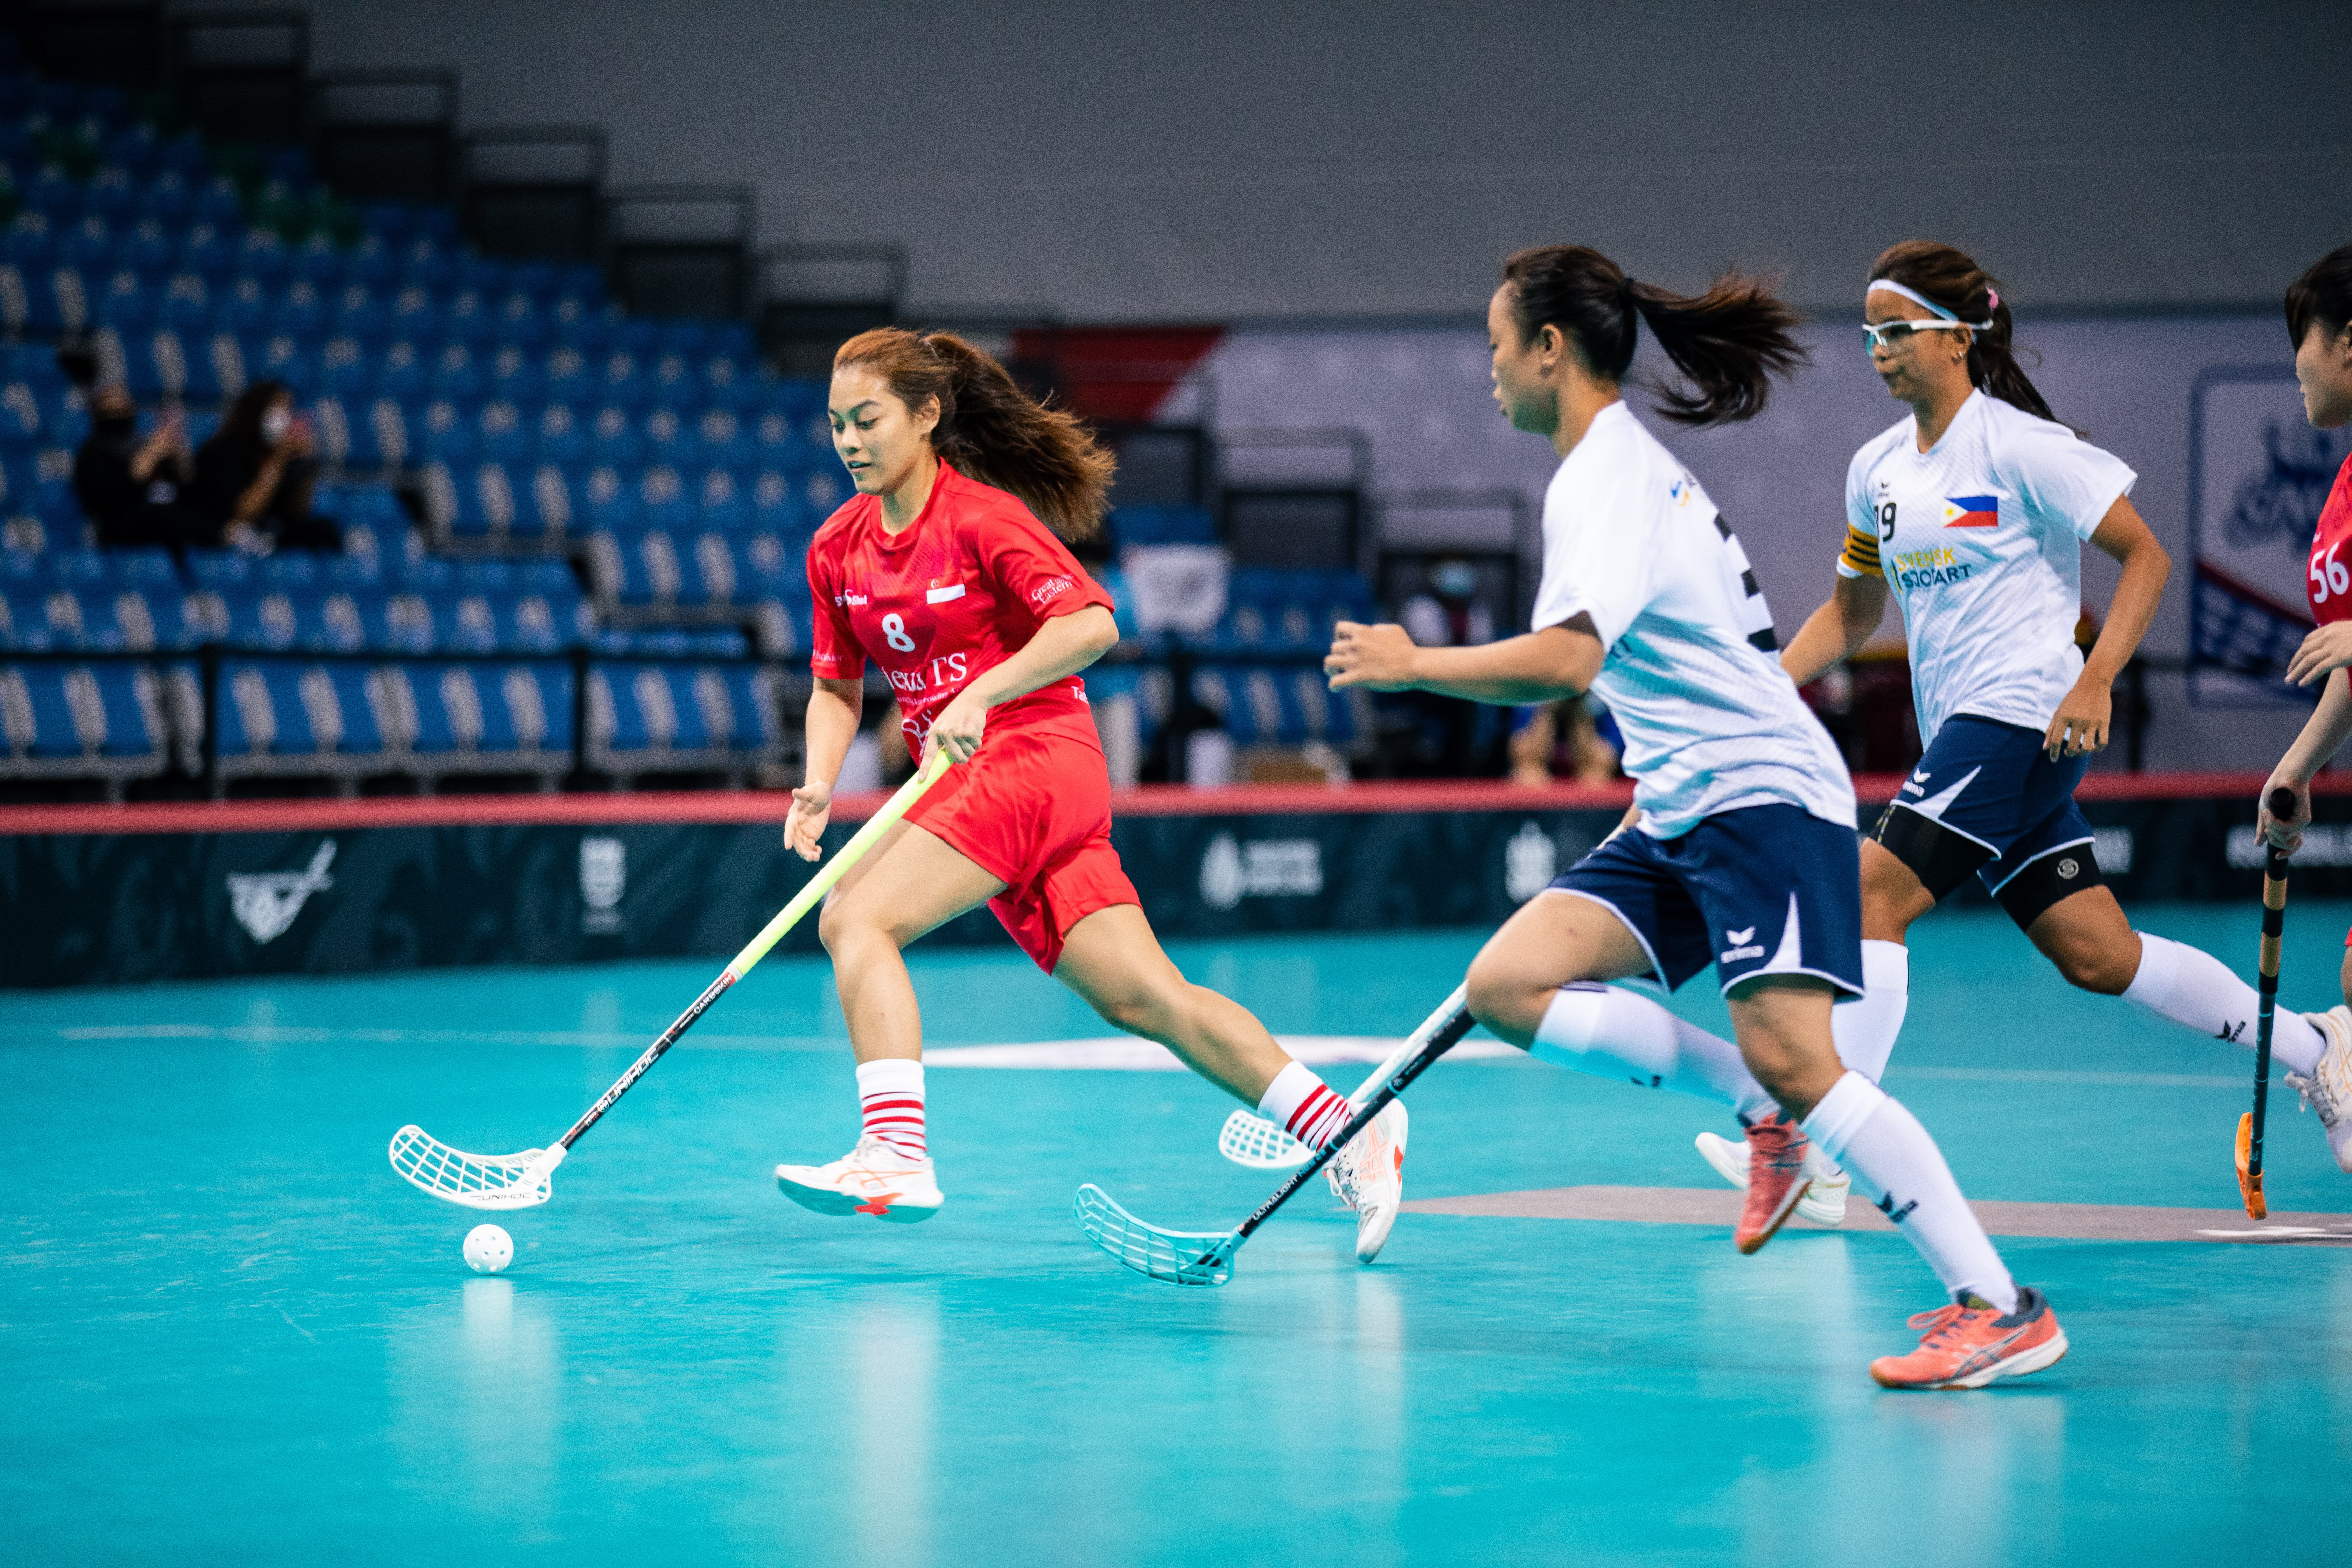 20220527_Singapore vs Philippines (2)_Photo Credit_ Eng Chin An, Singapore Floorball Series